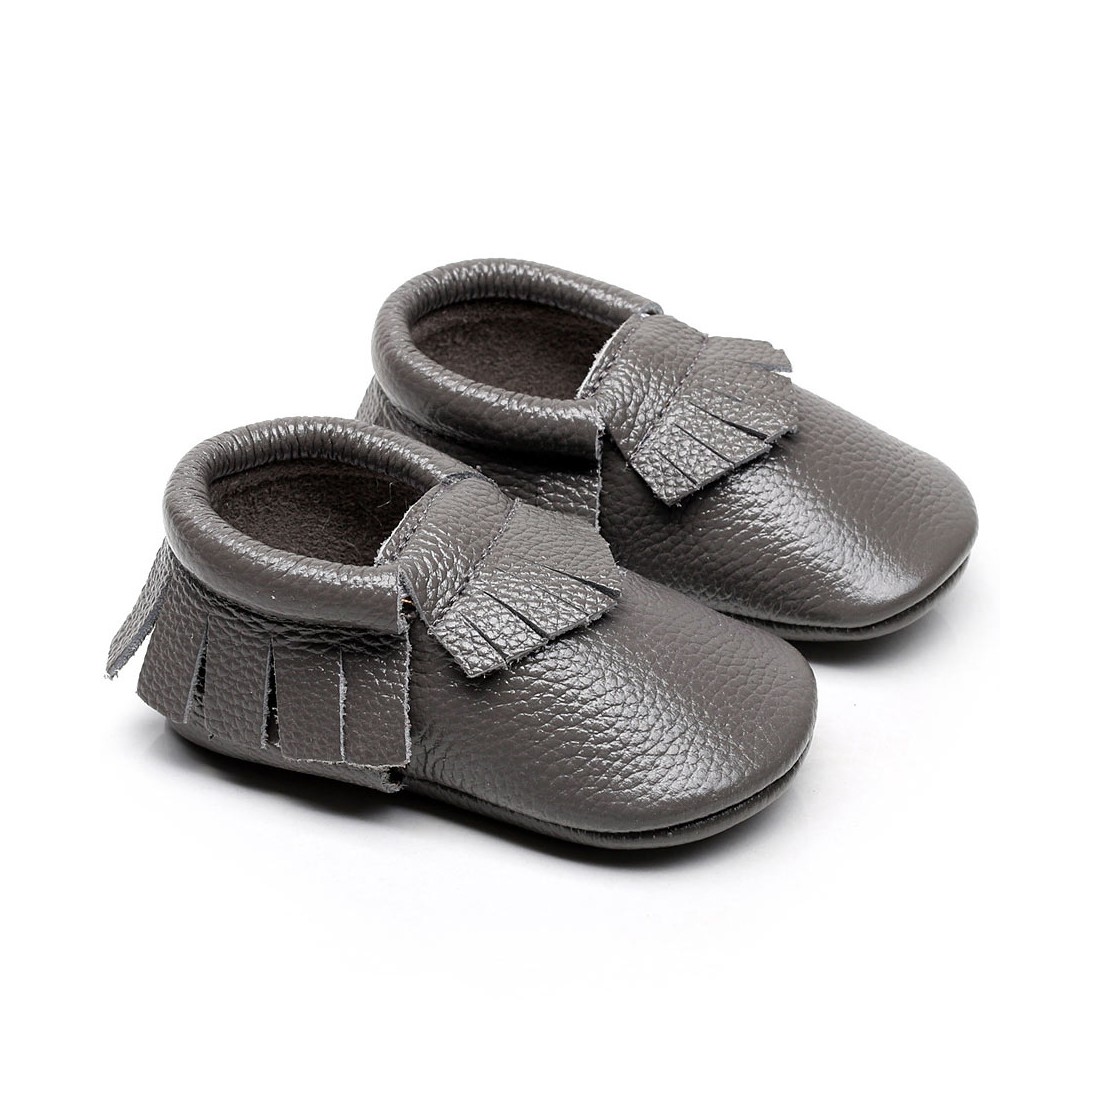 Sheffield - Soft Leather Baby Moccasins